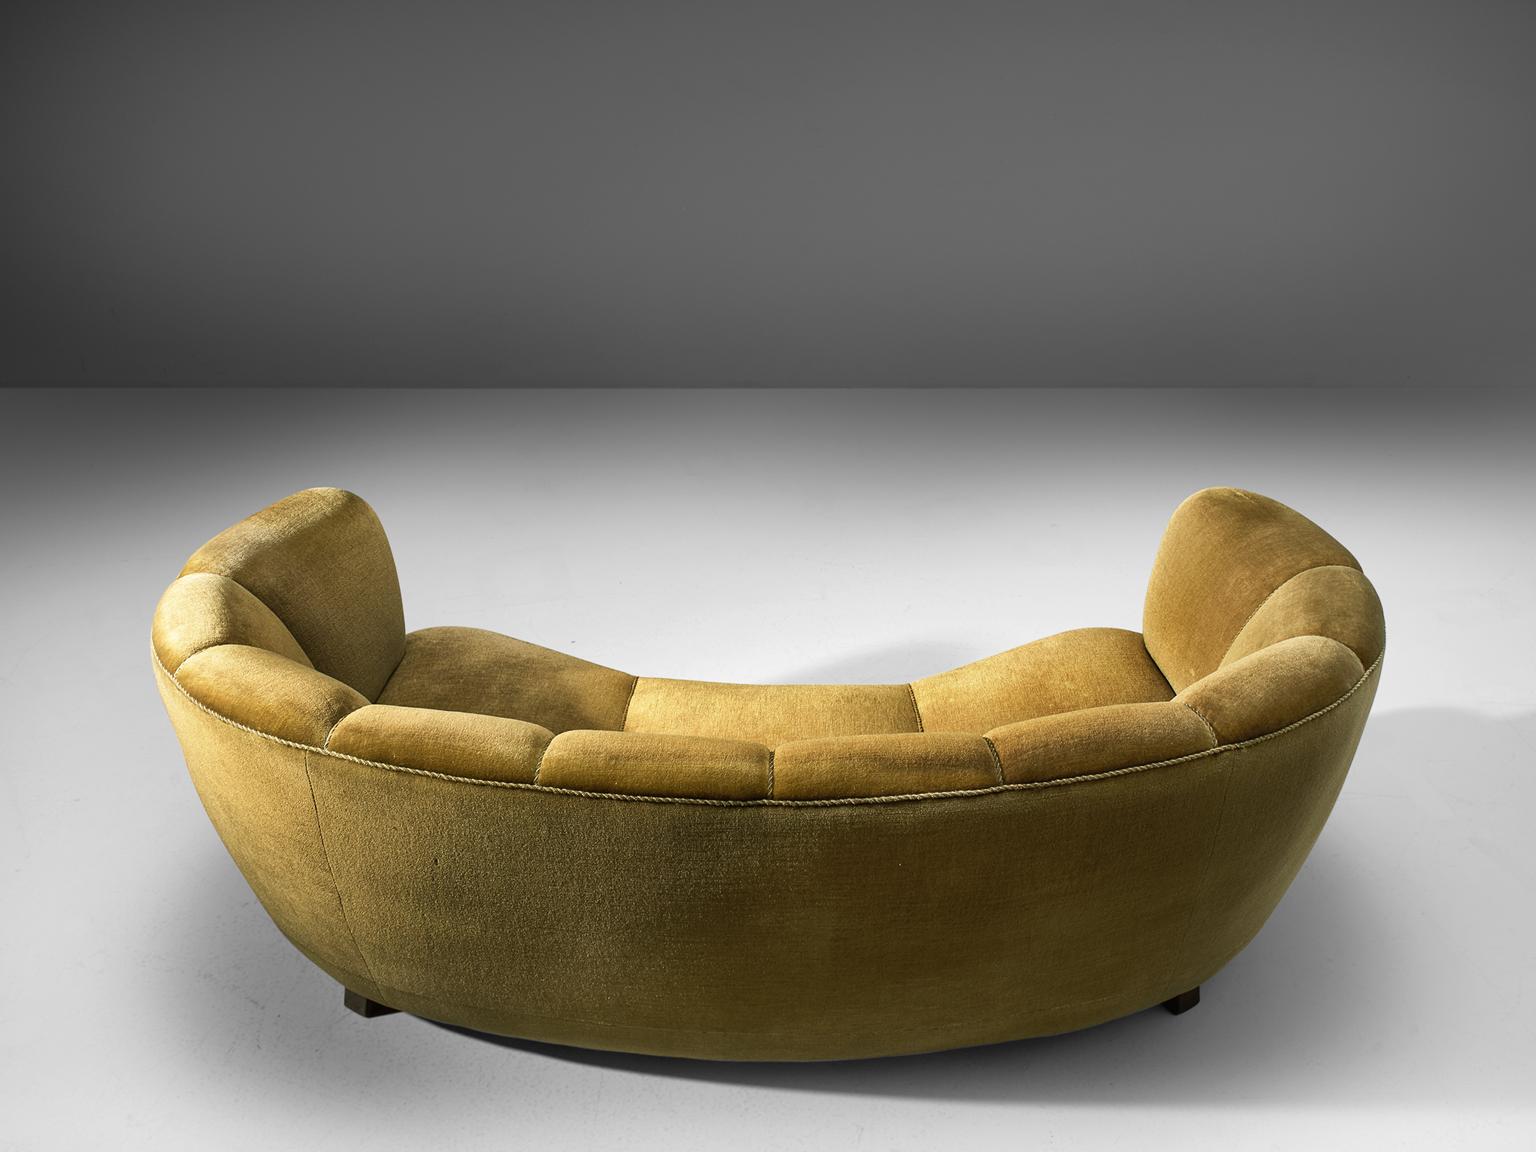 Curved sofa, yellow/green velvet and oak, France, 1950s

This voluptuous sofa is executed with wooden legs and shimmering mustard colored velvet fabric. The sofa has a high webbed, curved back and a very thick body, both the back and armrests are